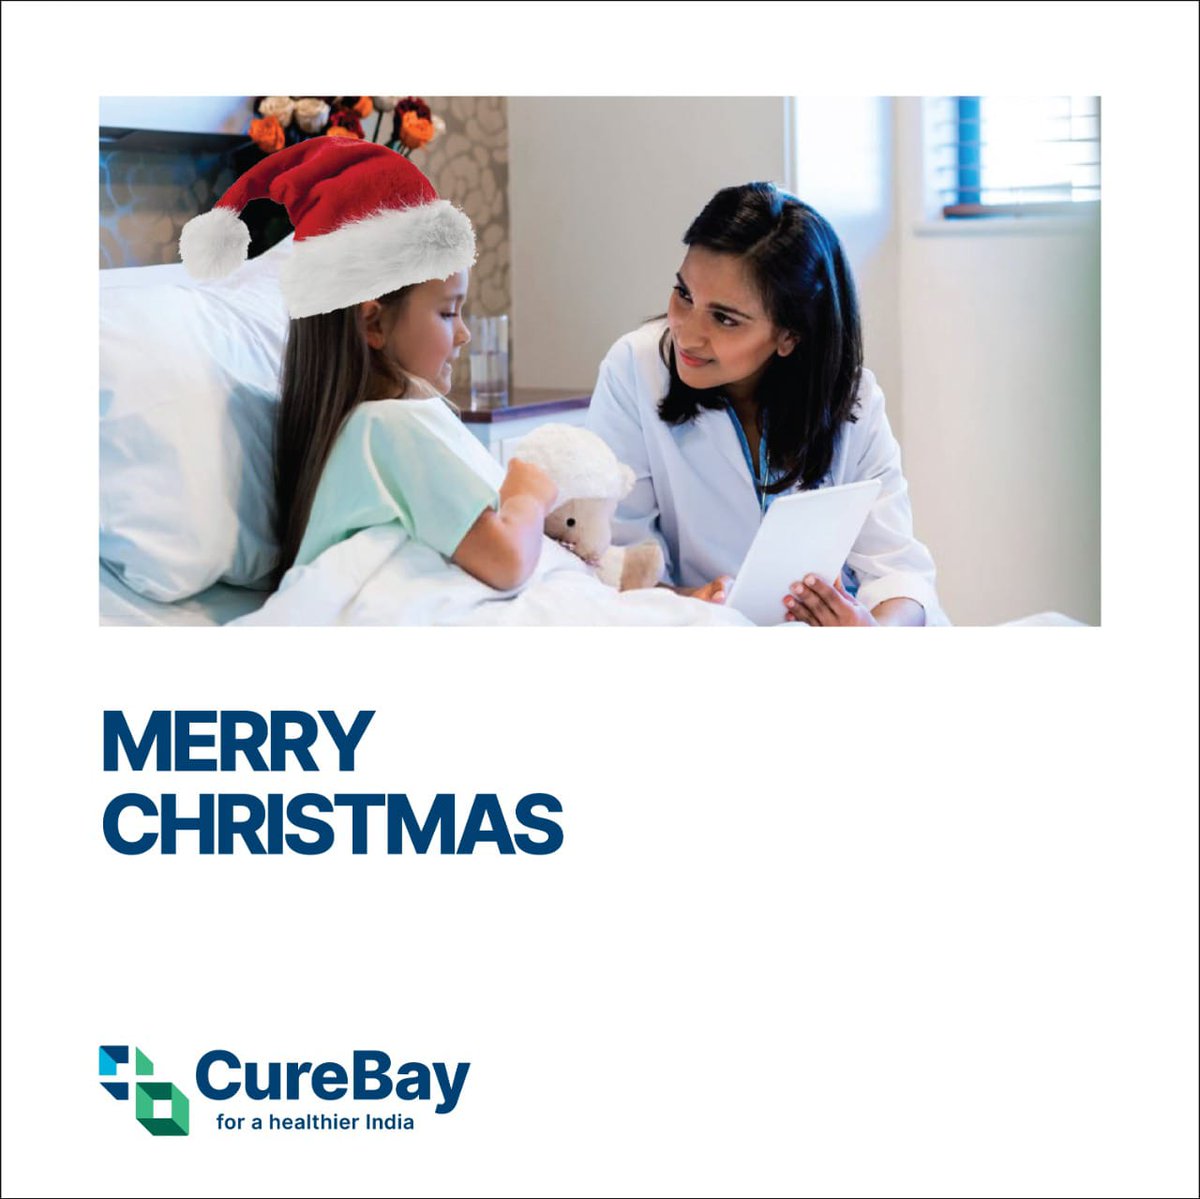 Amid the chaos of Christmas celebrations, may lord Jesus bestow you with smiles, goodness, health, wealth and happiness. CureBay wishes you all Merry Christmas. 

#CureBay #BridgeTheGap  #Healthcareforall #odisha #ForaHealthierIndia #GoodHealthtoAll #MerryChristmas